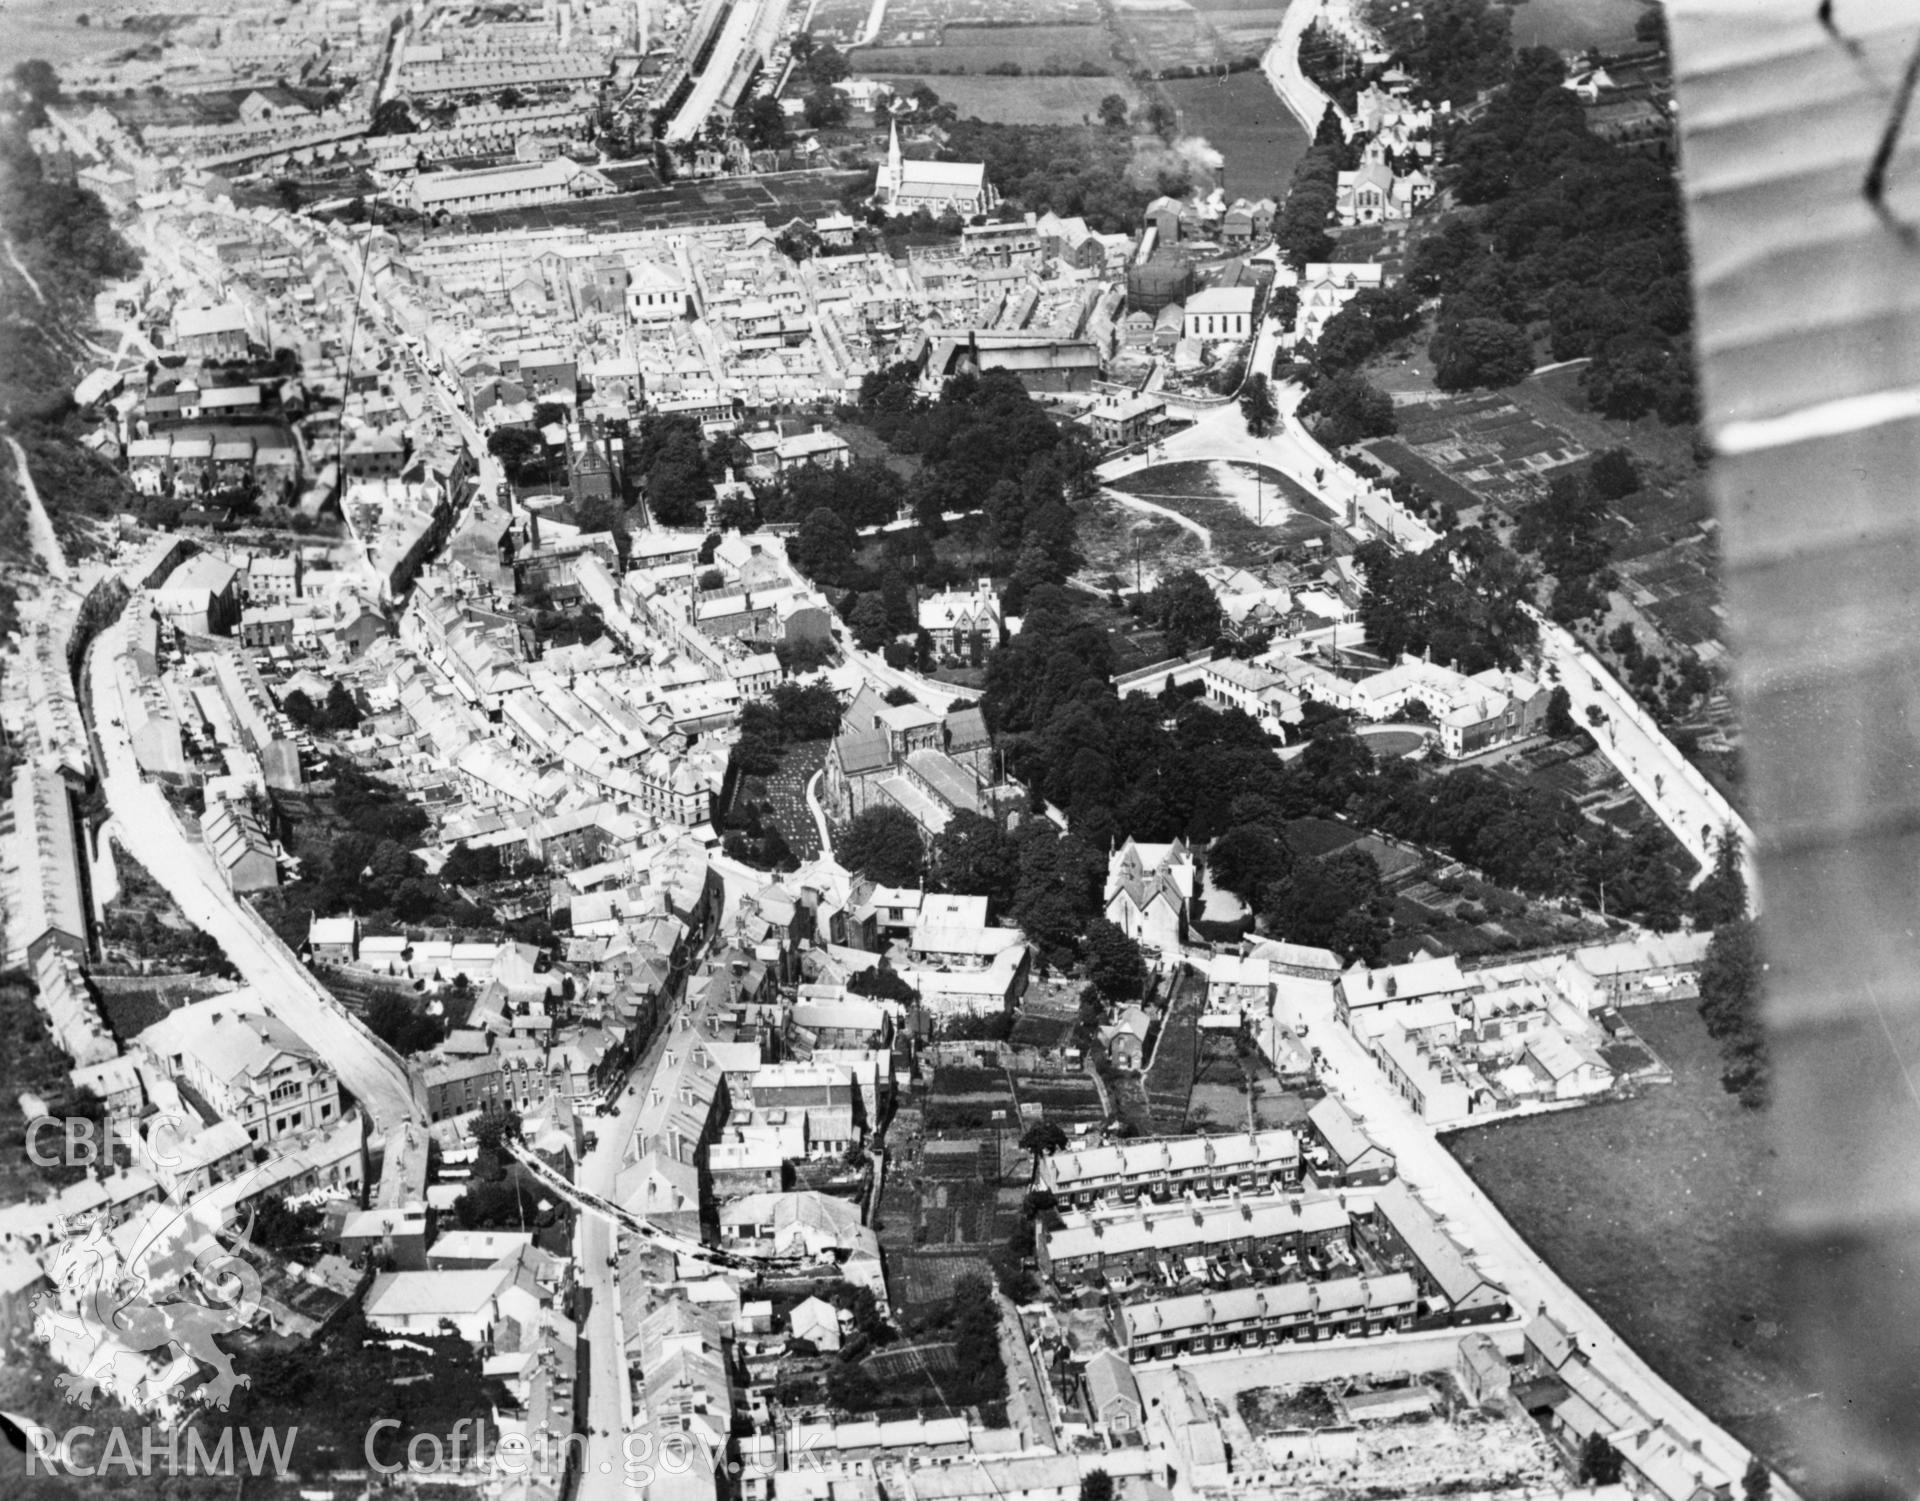 General view of Bangor showing cathedral. Oblique aerial photograph, 5?x4? BW glass plate.